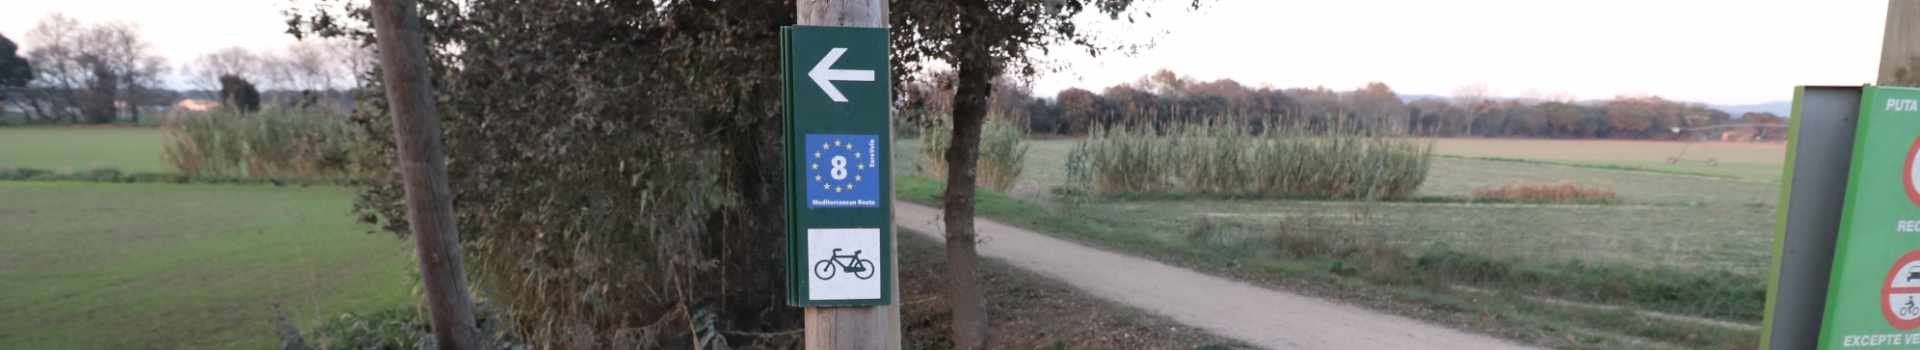 Pirinexus - Cycling route between Mediterranean sea and the Pyrenees